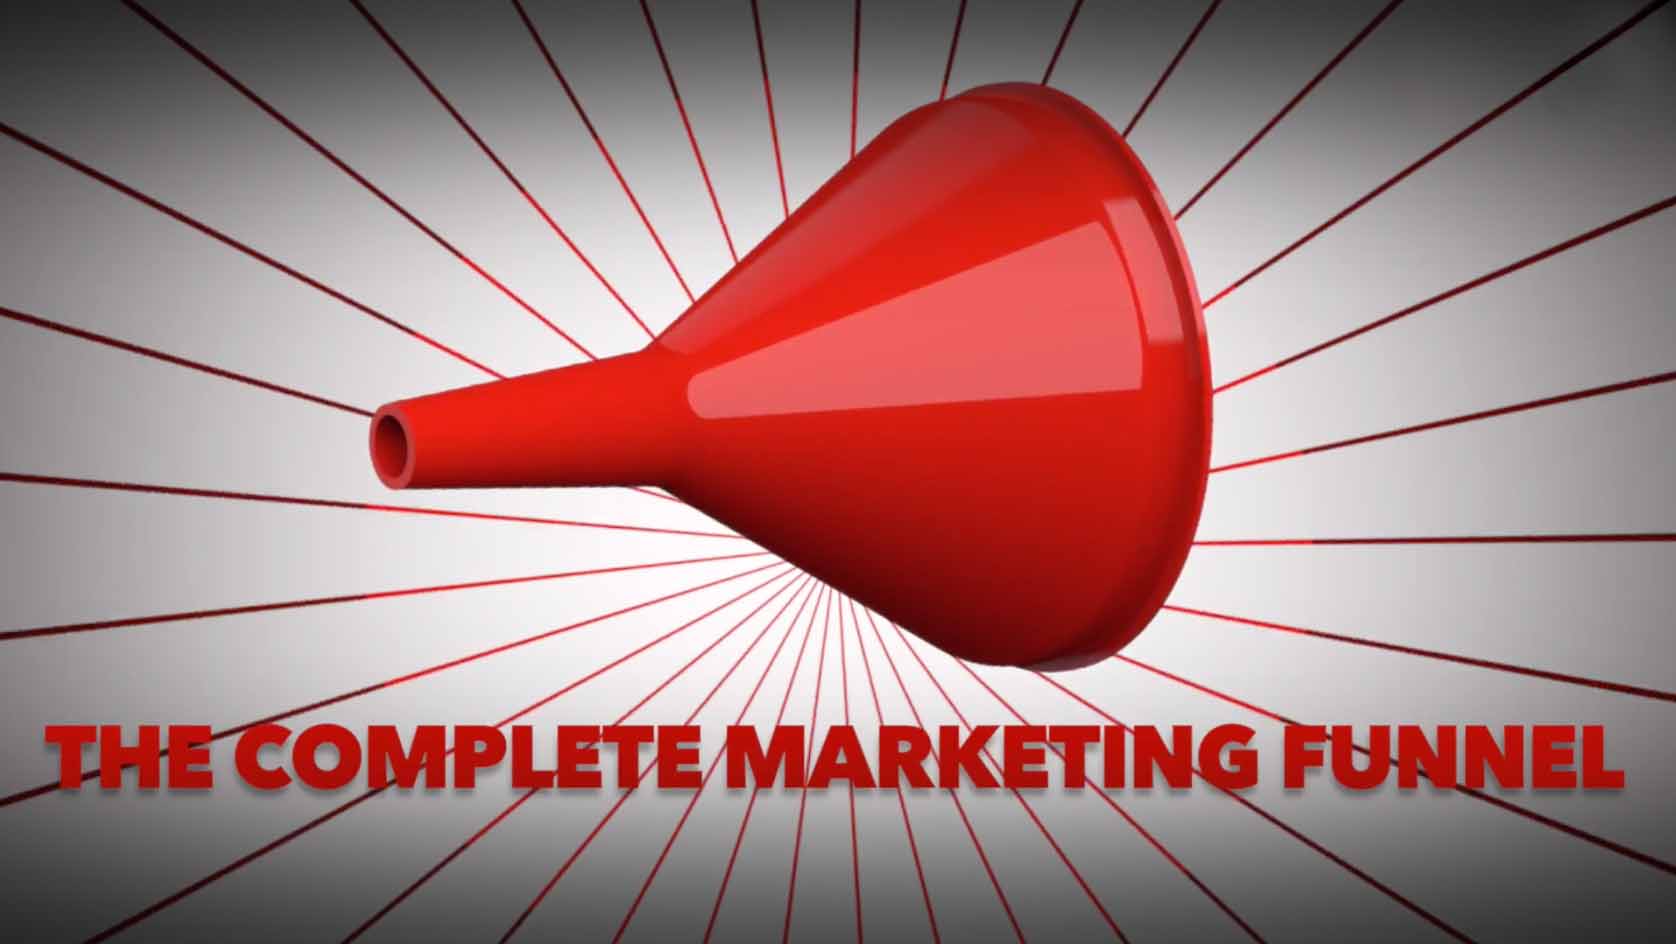 Red megaphone with text "The Complete Marketing Funnel" on a radial line background